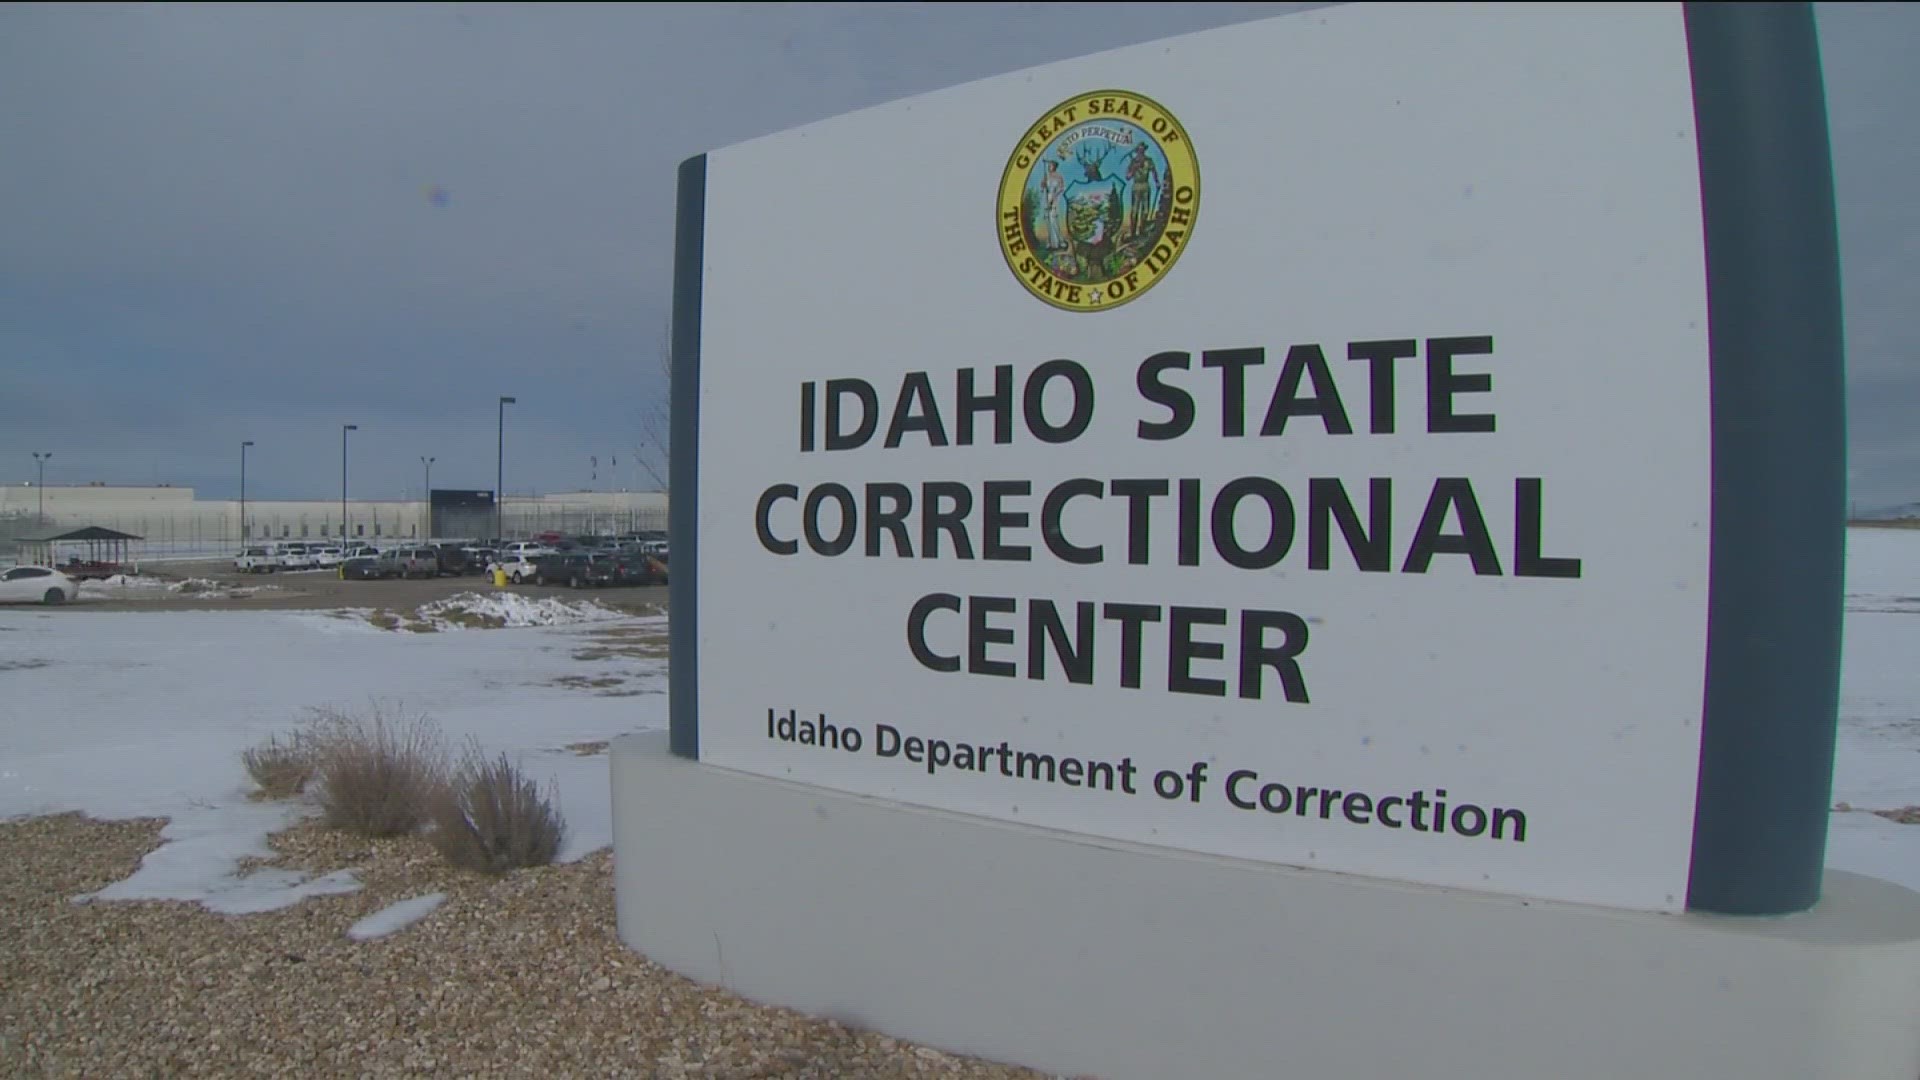 The family of Milo Warnock wants answers after he was beaten to death by another inmate at an Idaho prison in December.